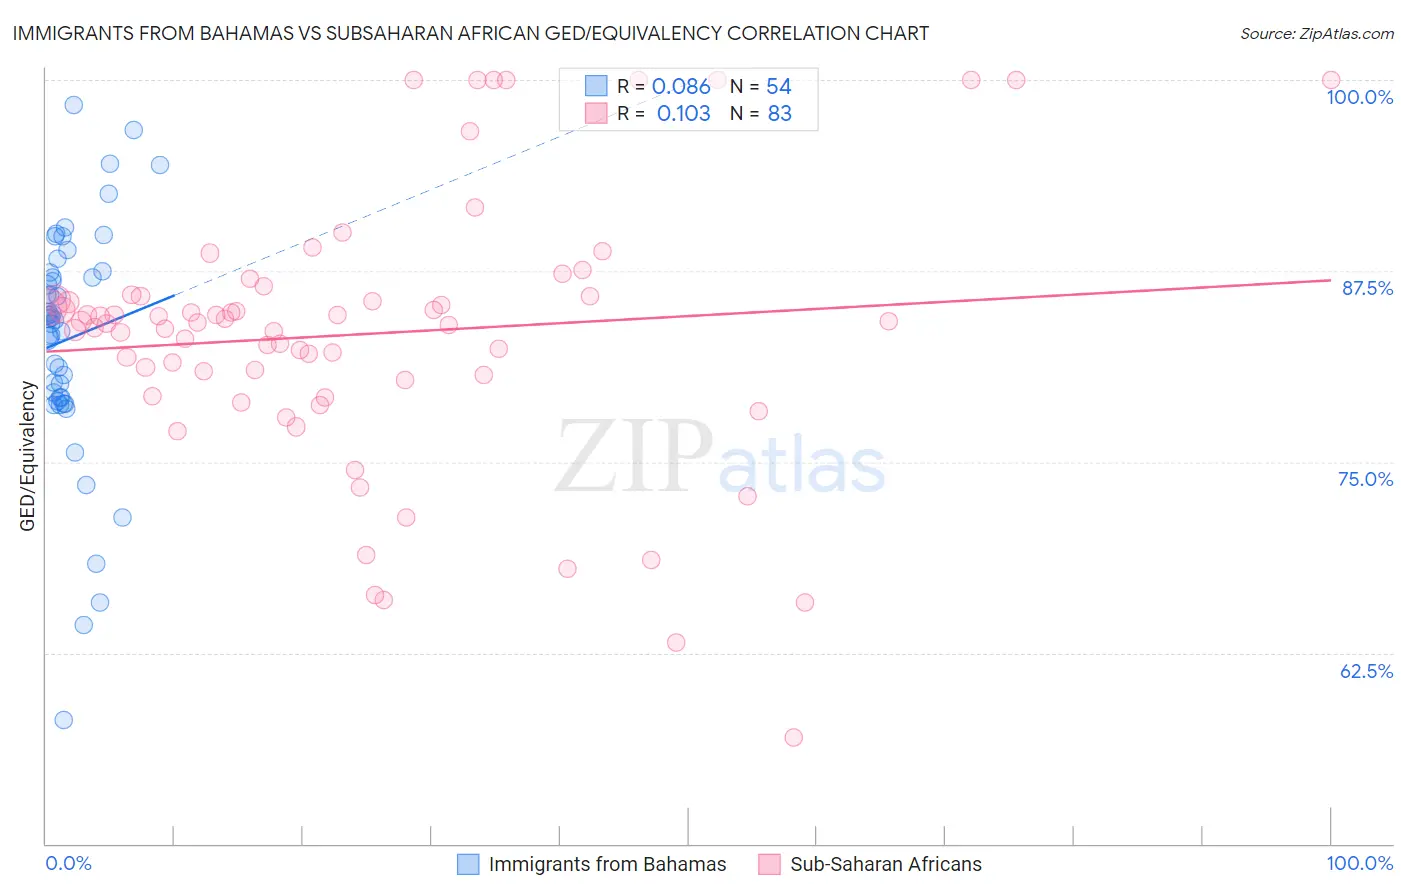 Immigrants from Bahamas vs Subsaharan African GED/Equivalency